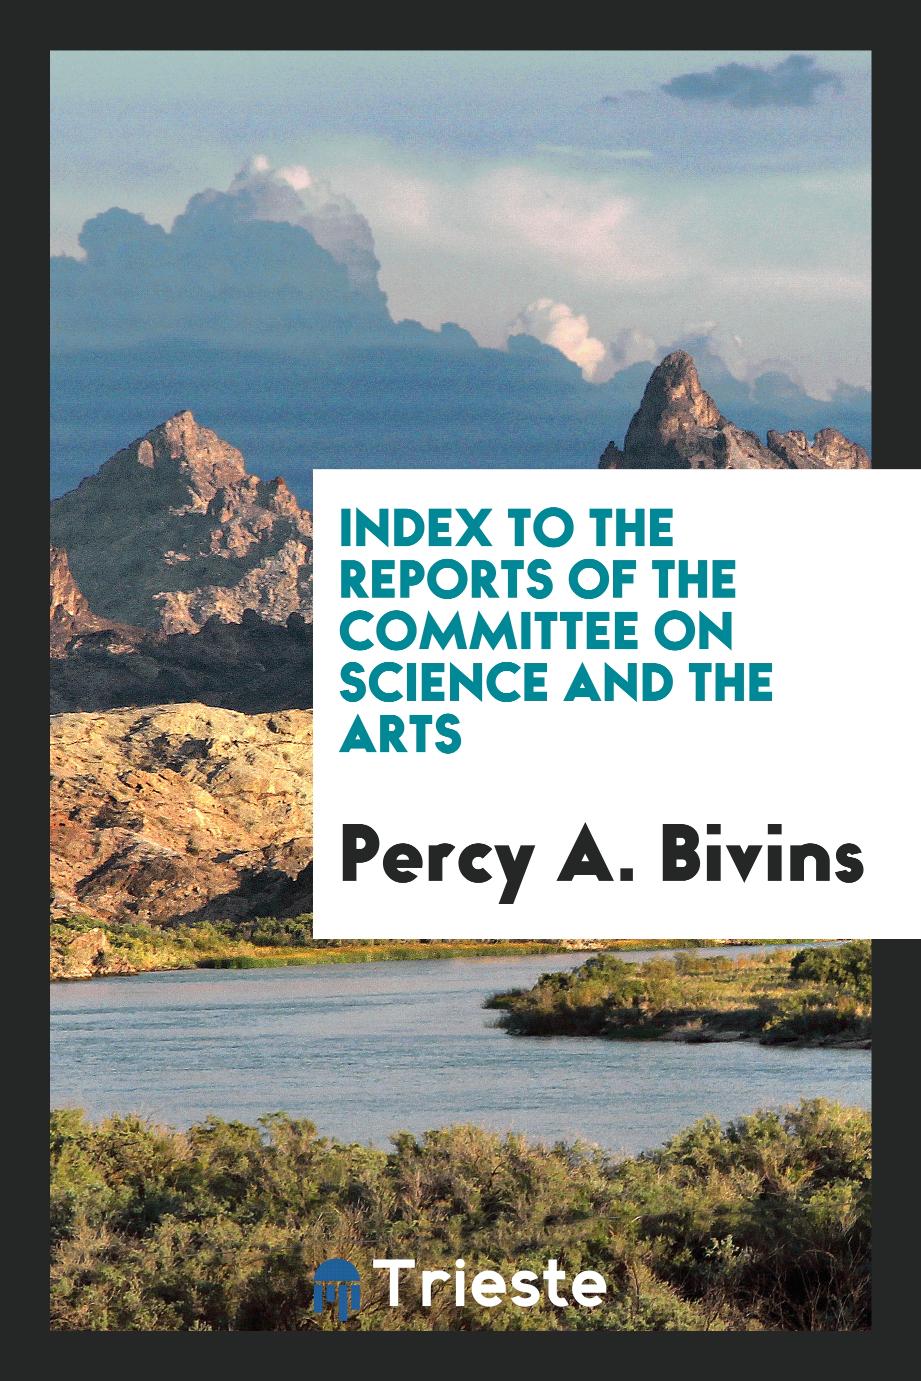 Index to the Reports of the Committee on Science and the Arts